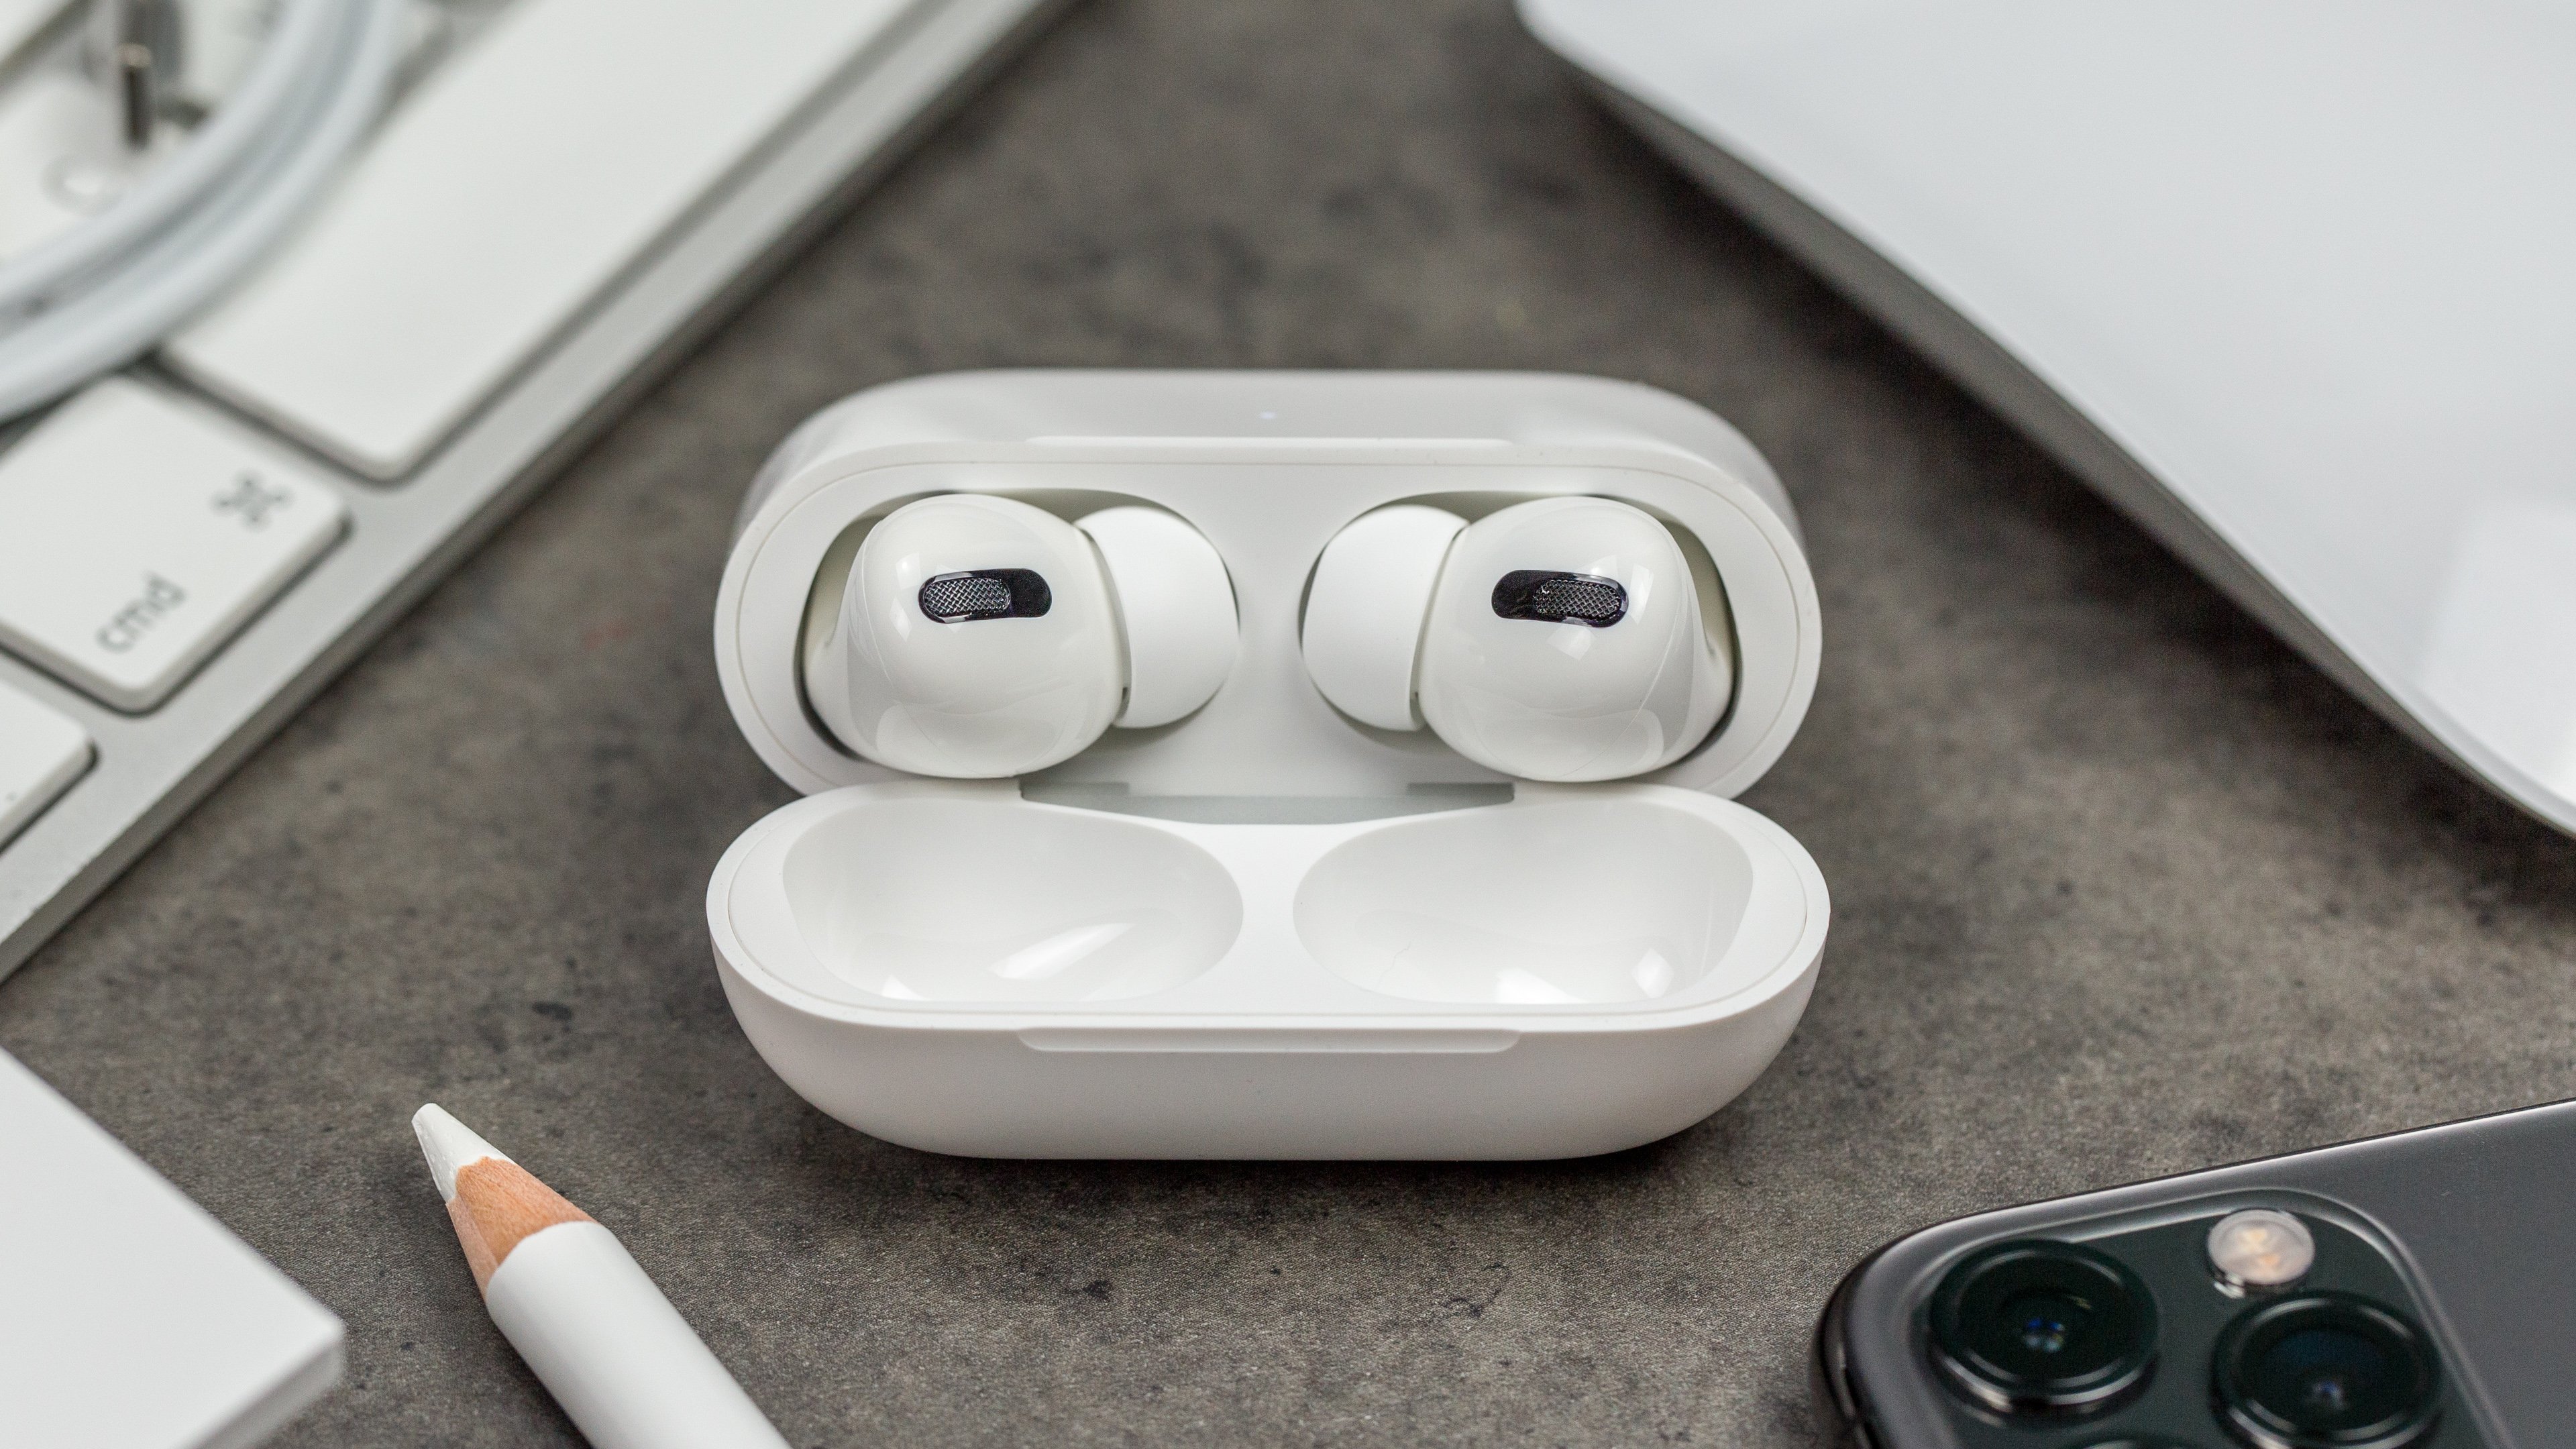 5 features and improvements to expect on AirPods Pro 2: Did you know?